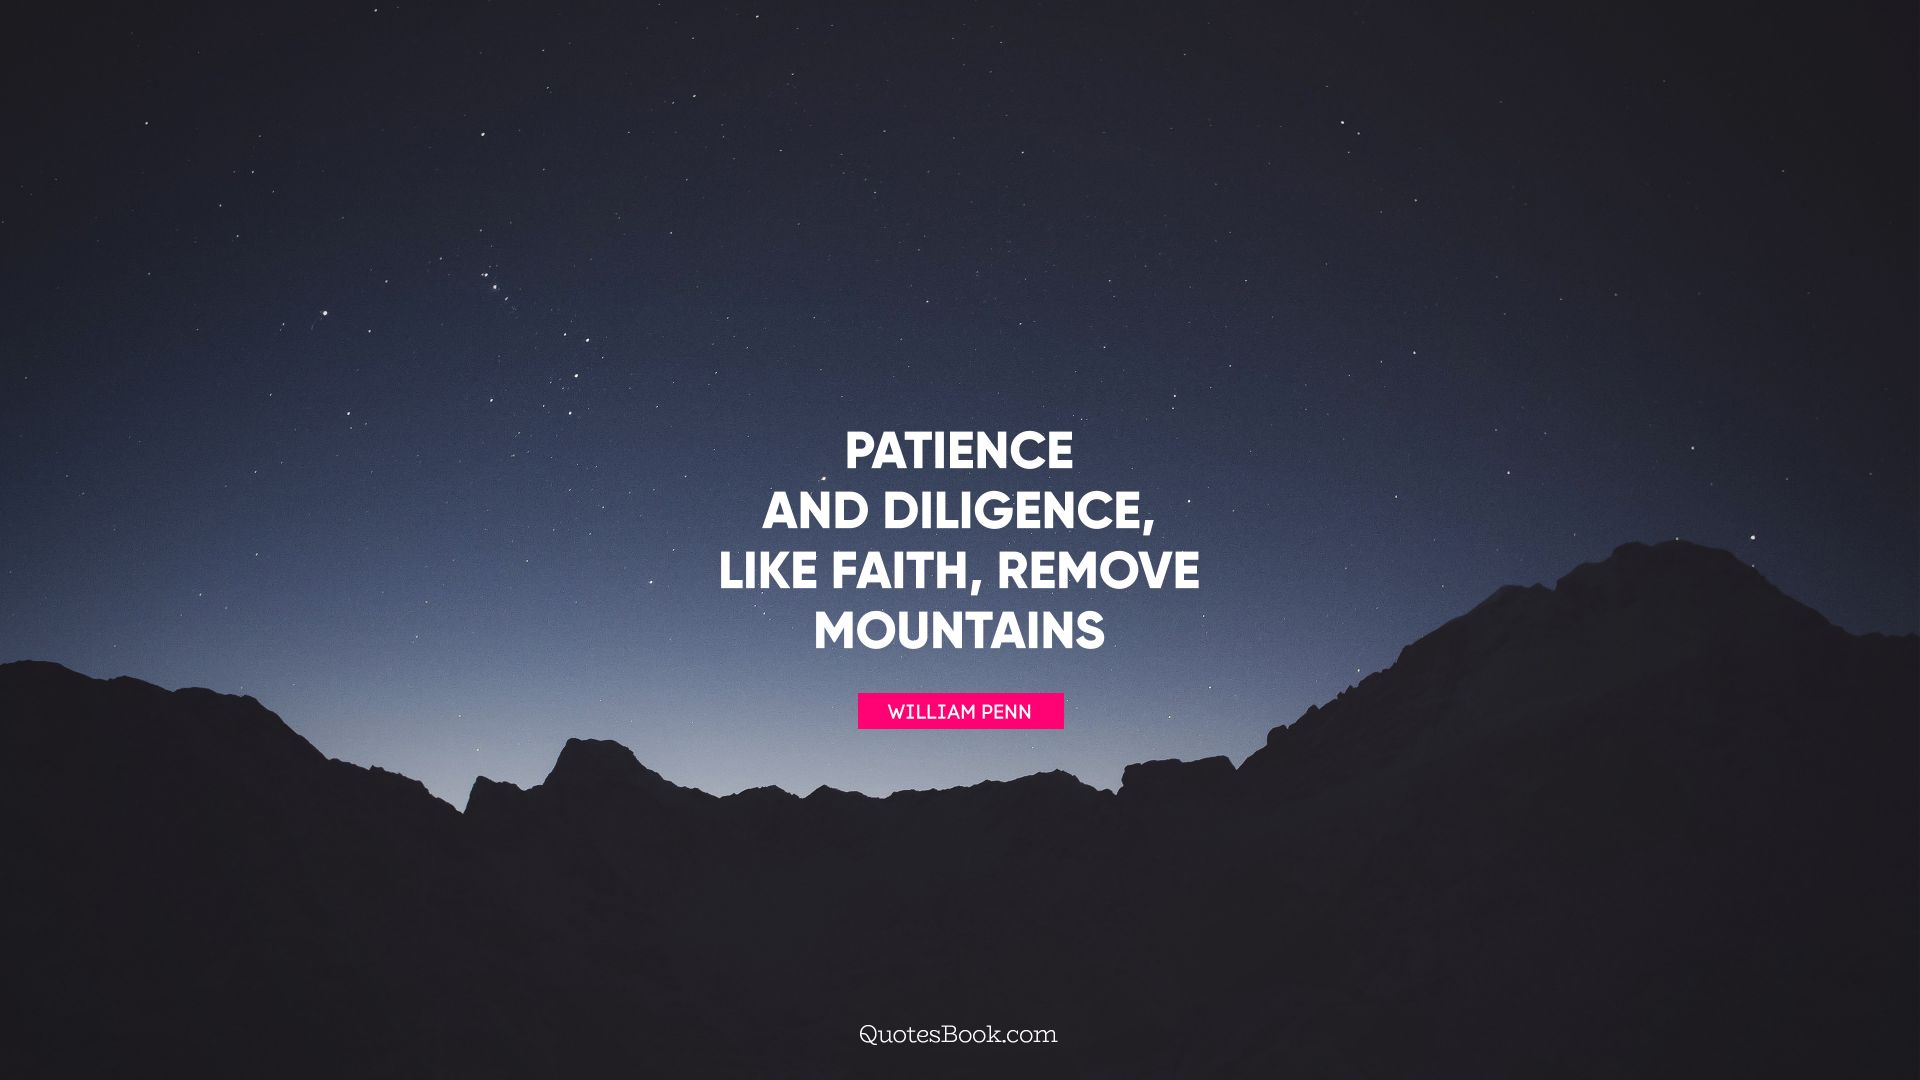 Patience and Diligence, like faith, remove mountains. - Quote by William Penn